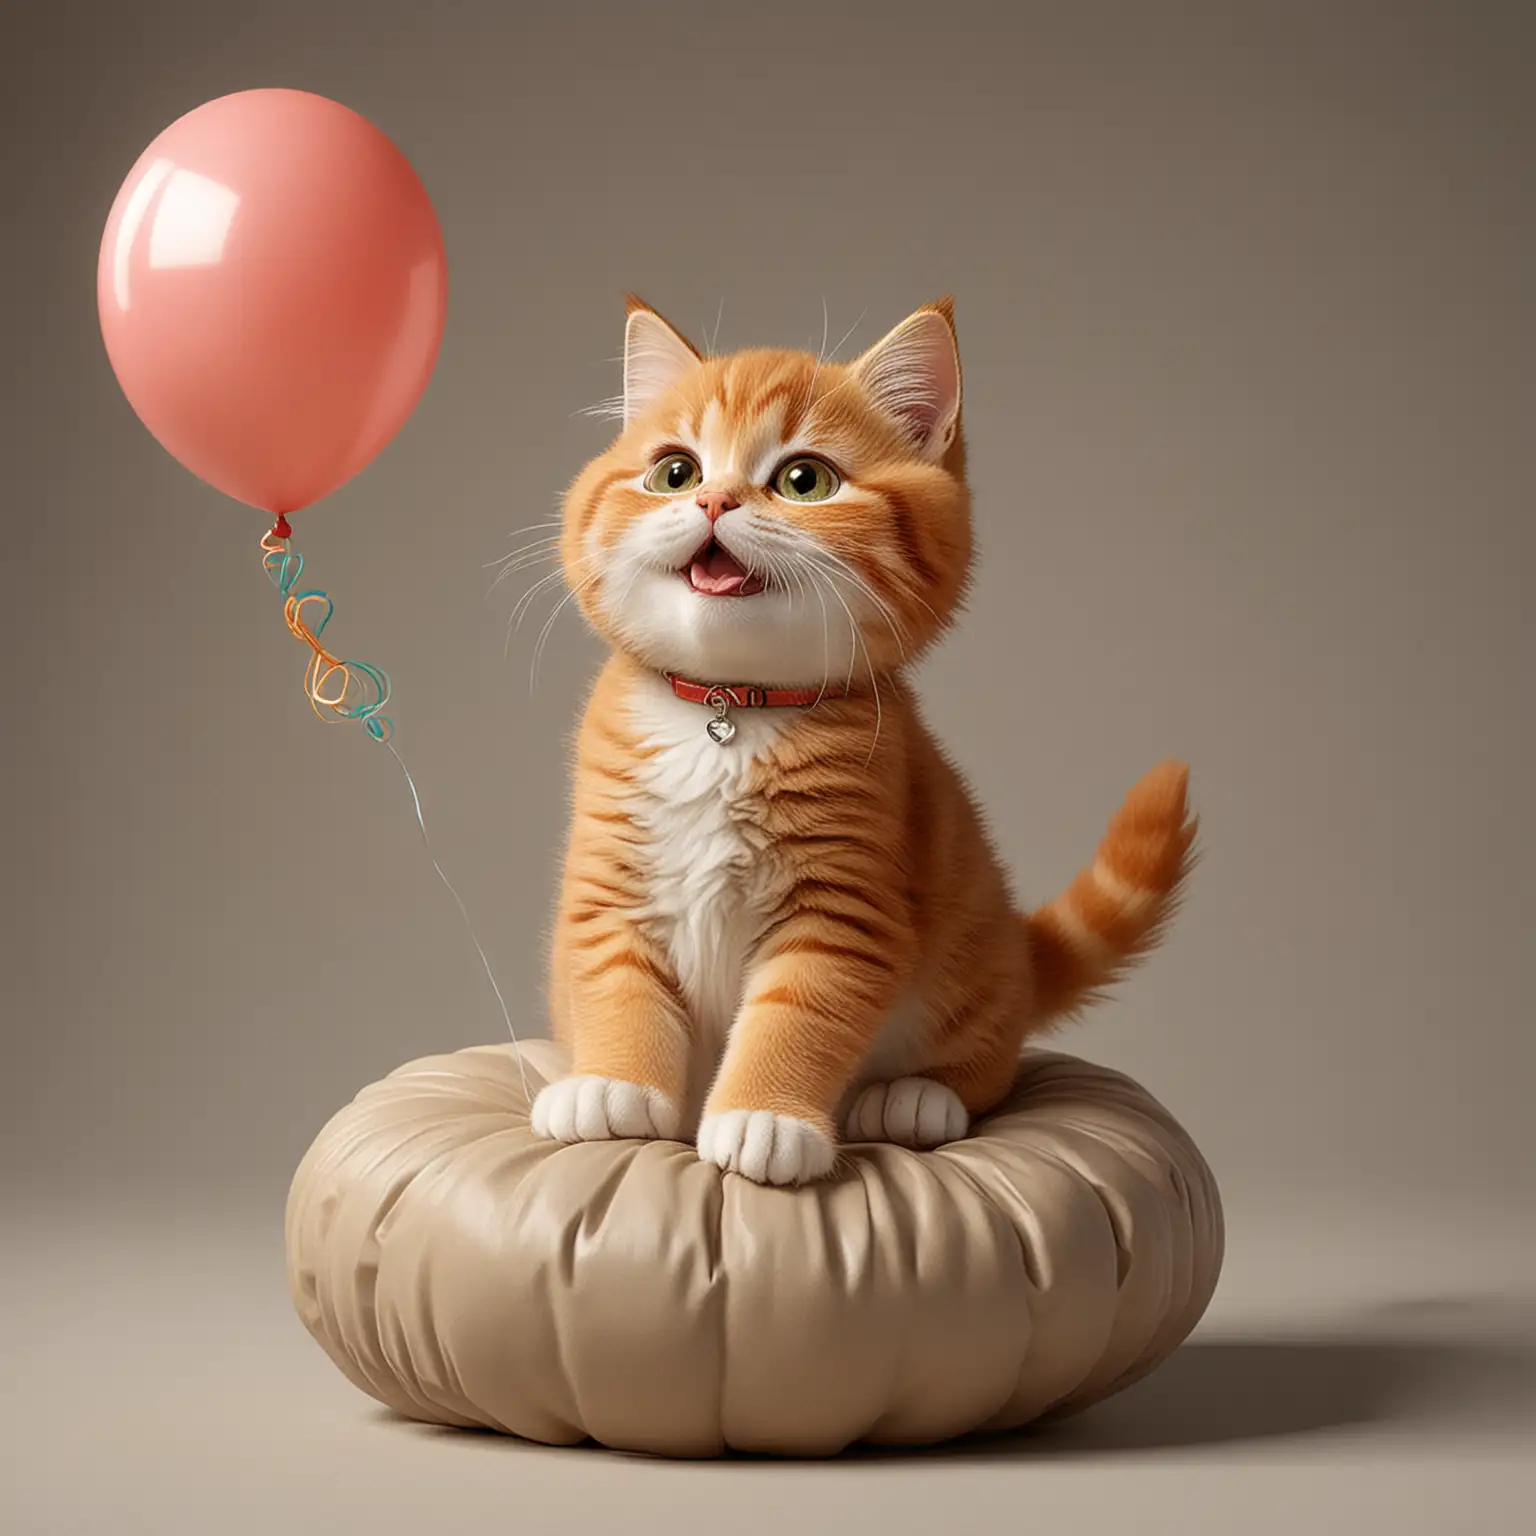 Happy Cartoon Kitten Relaxing on Couch with Triple 888 Balloon